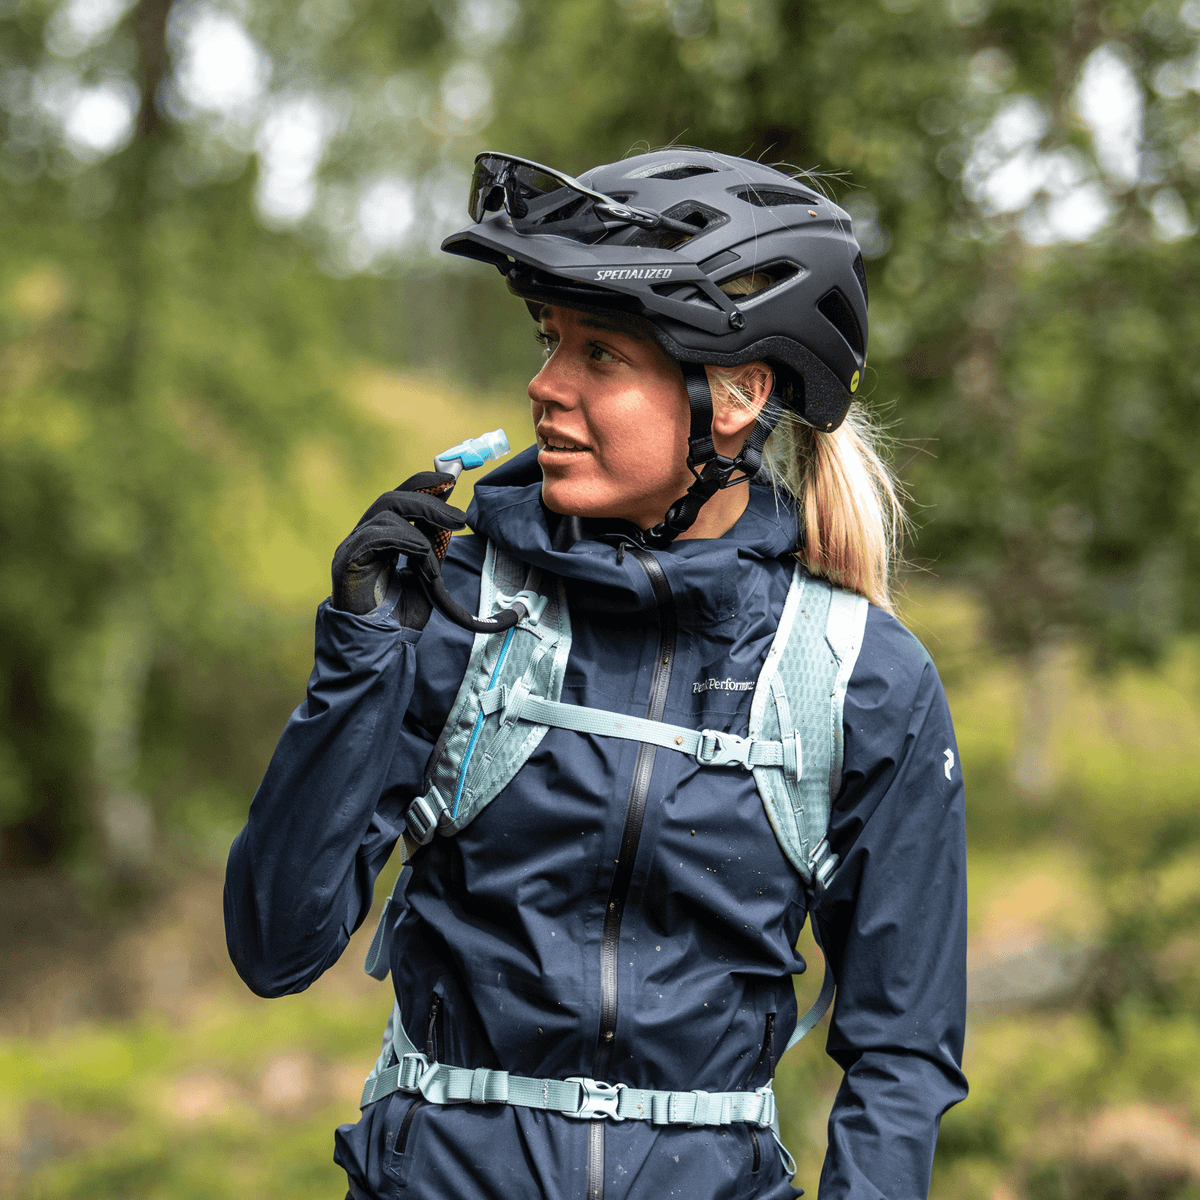 A woman on an mtb path with a black helmet takes a sip of water from a Thule Vital 3L Hydration Backpack.